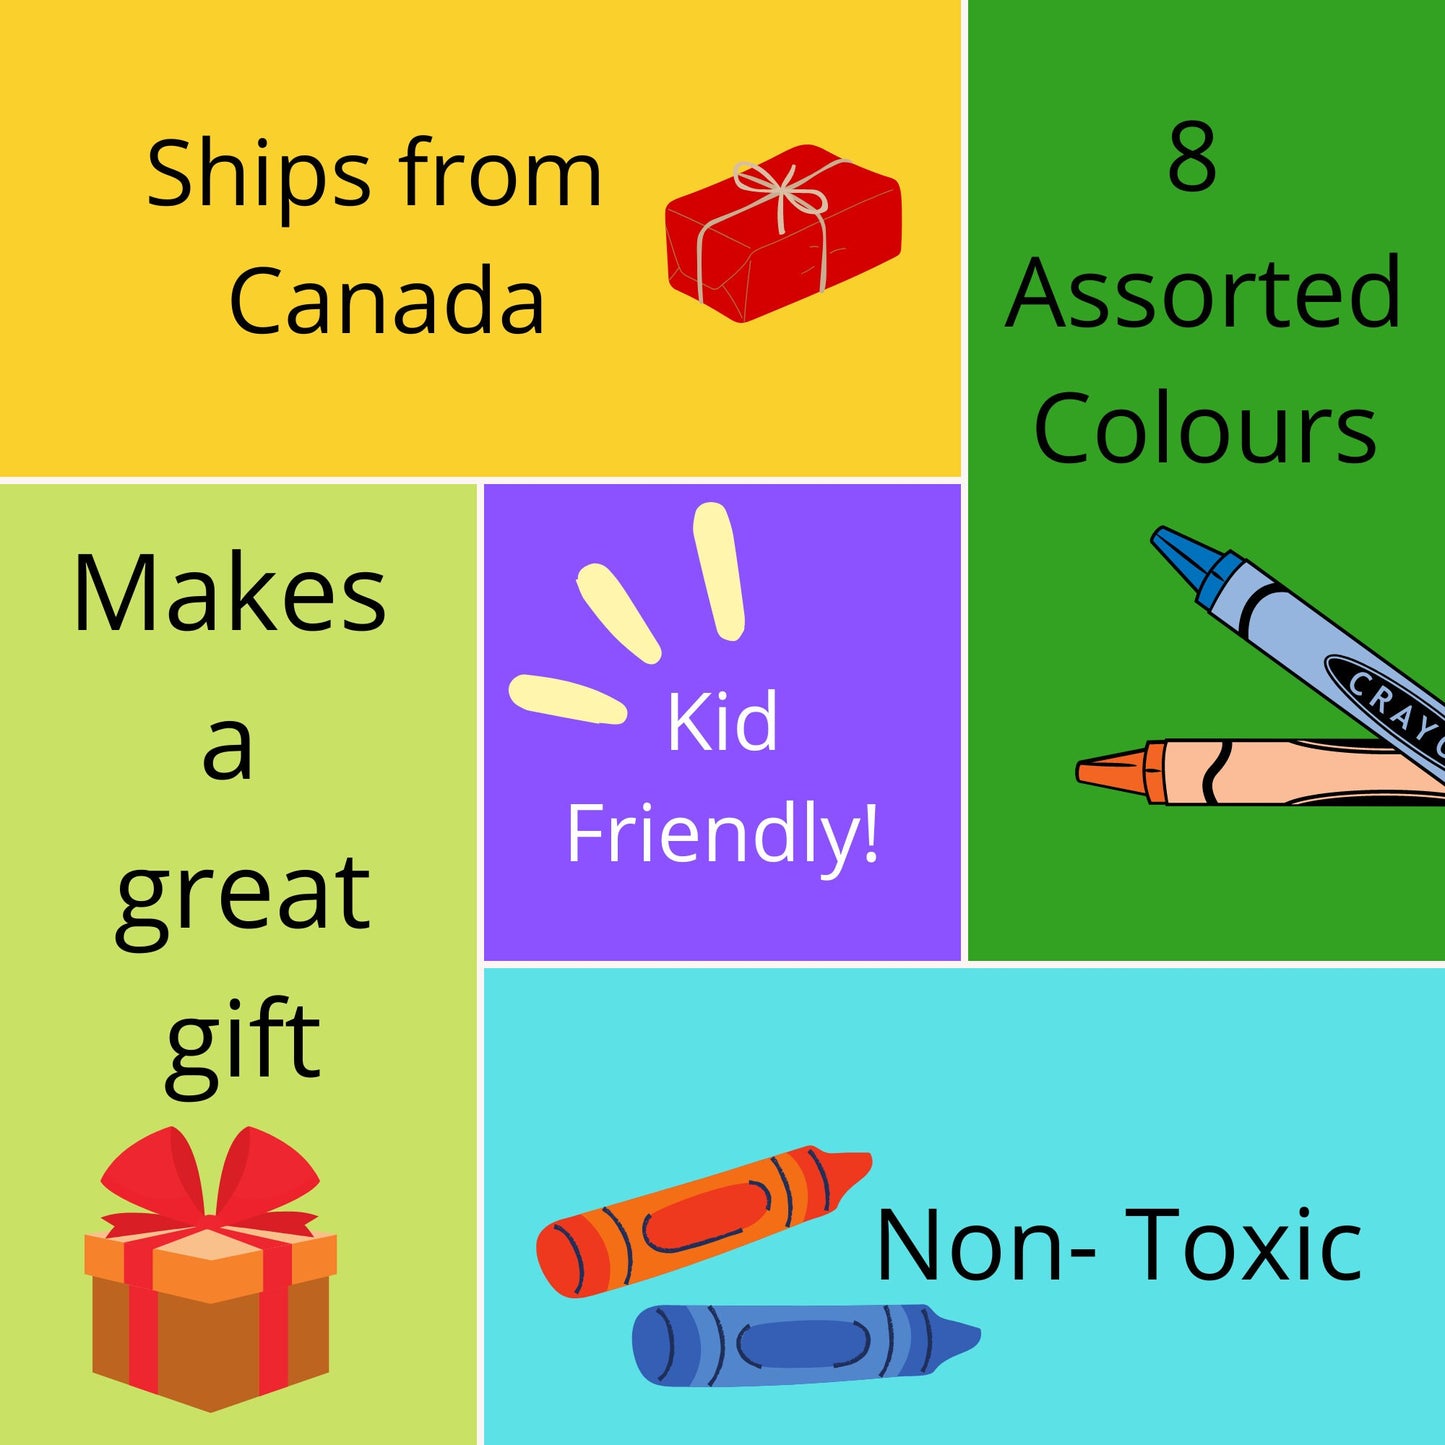 Crayola 8 Colors of Kindness Washable Crayons